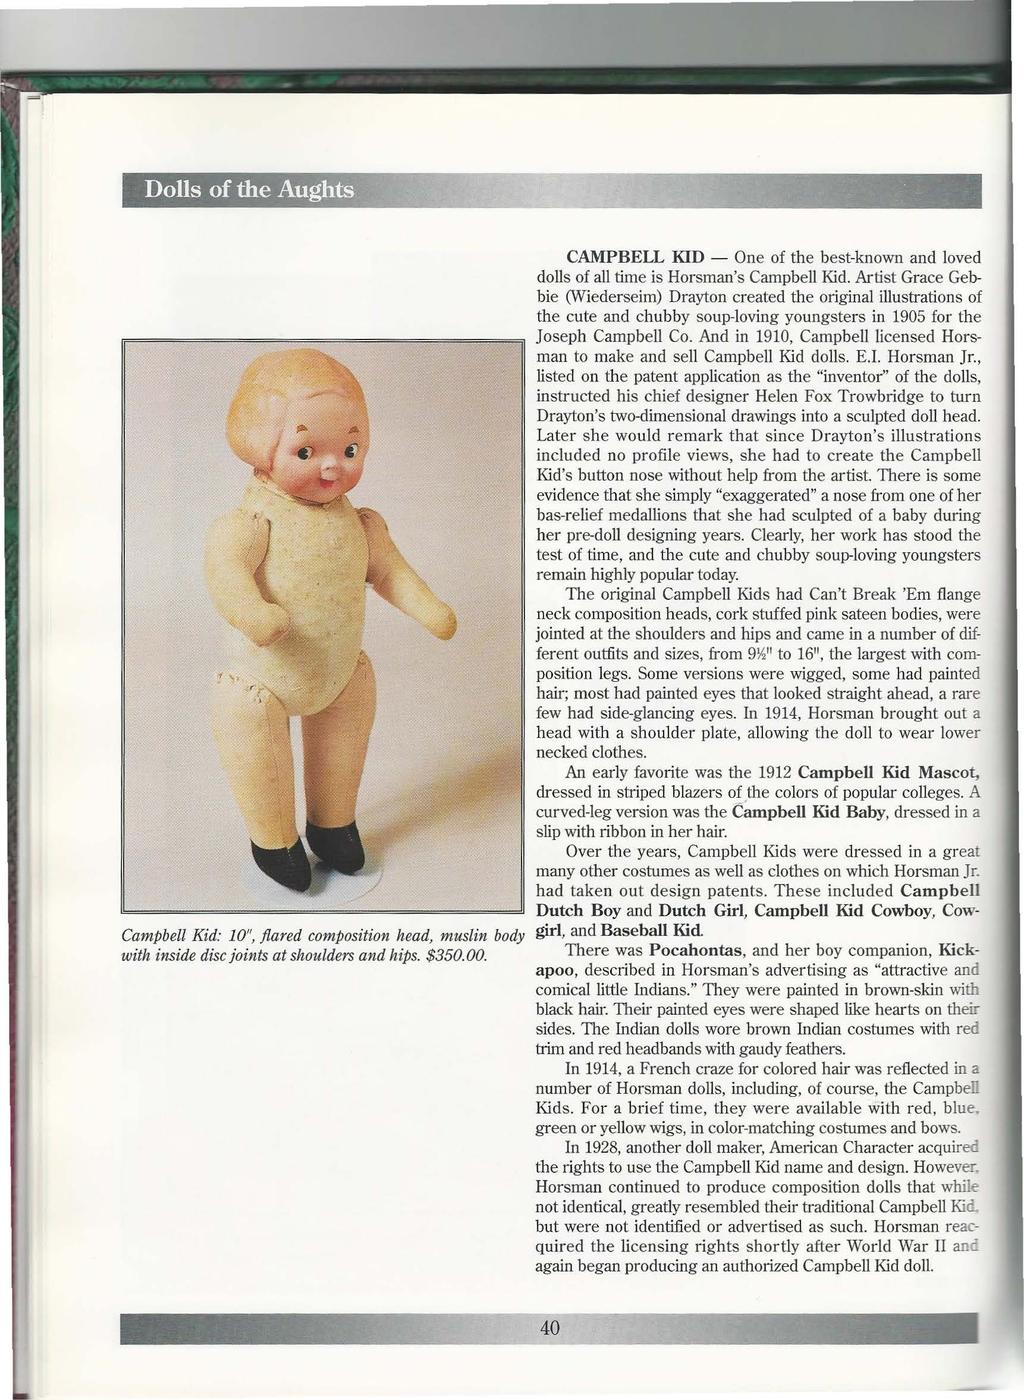 Dolls of the AughtS:! ' Campbell Kid: 10", flared composition head, muslin body with inside disc joints at shoulders and hips. $350.00.